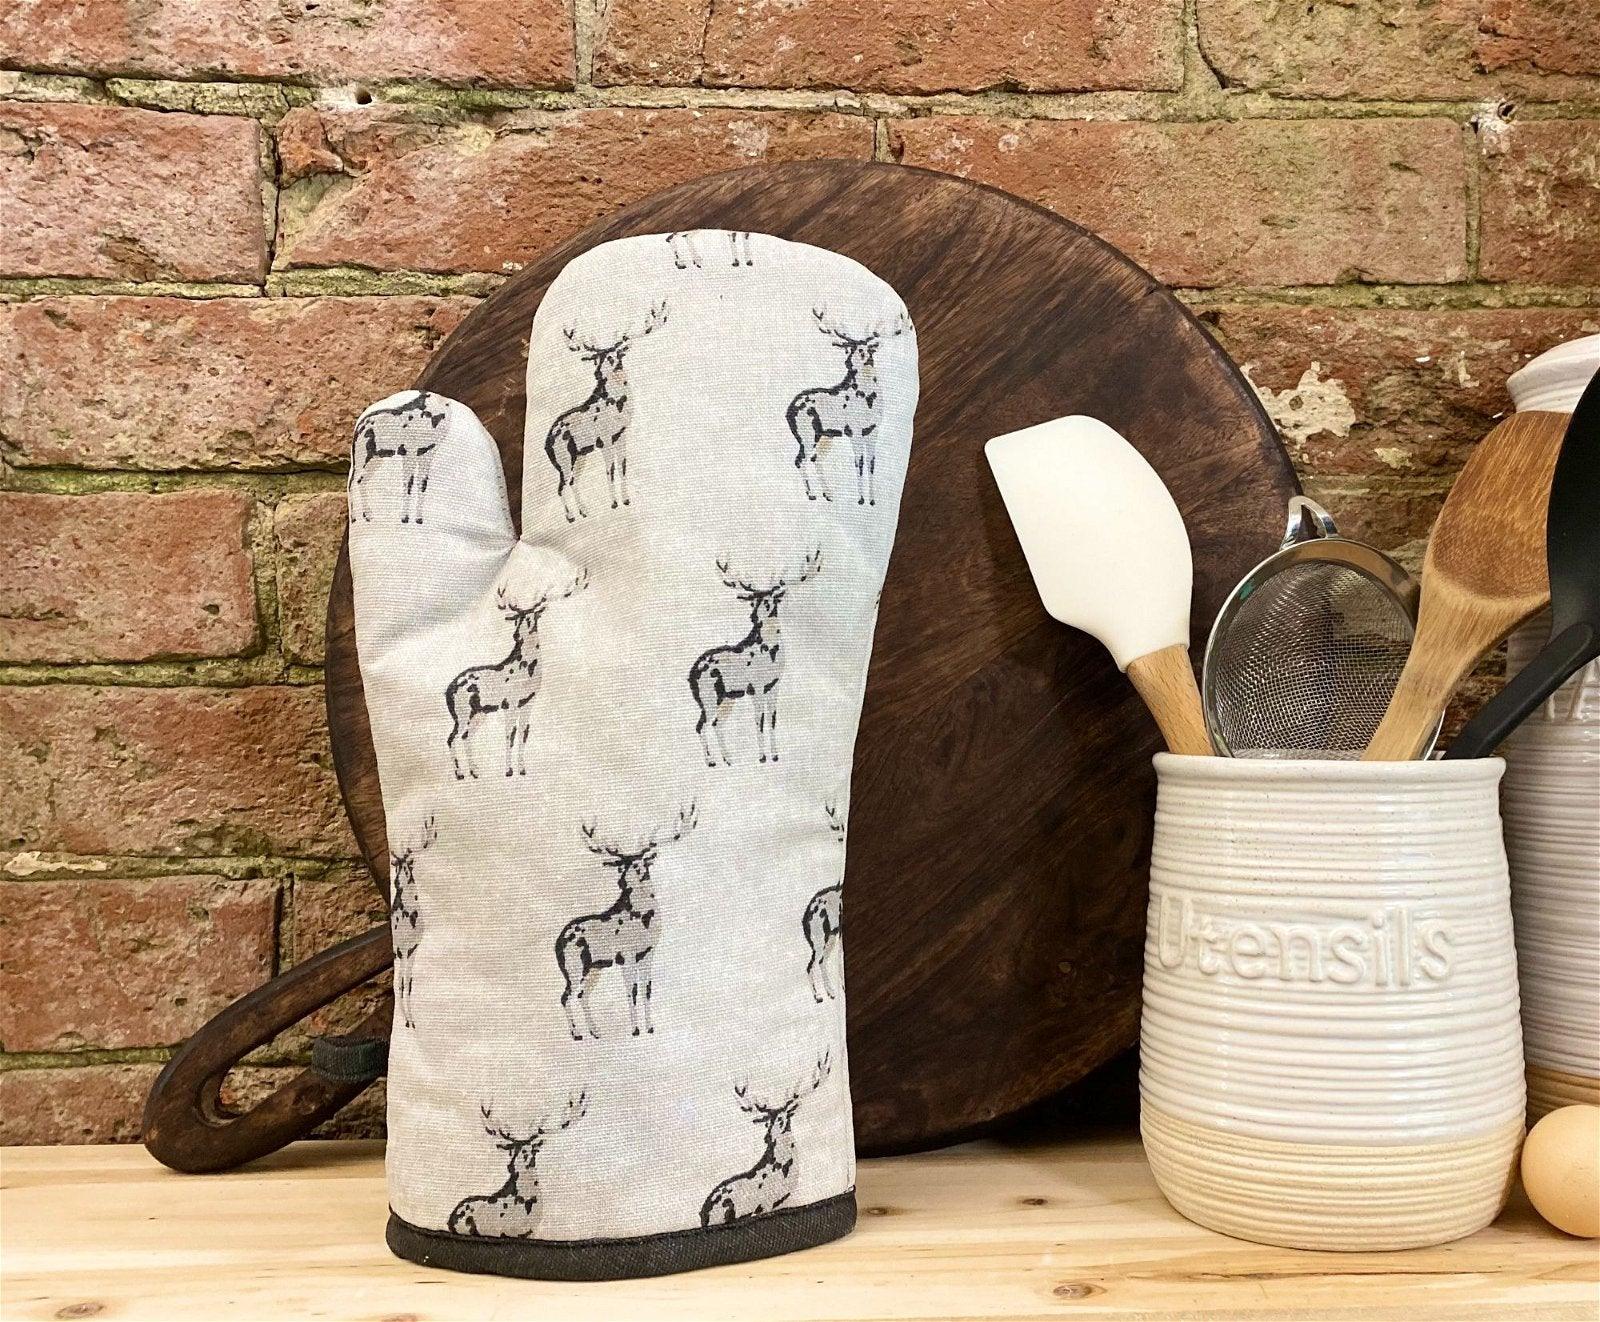 View Grey Oven Glove With A Stag Print Design information